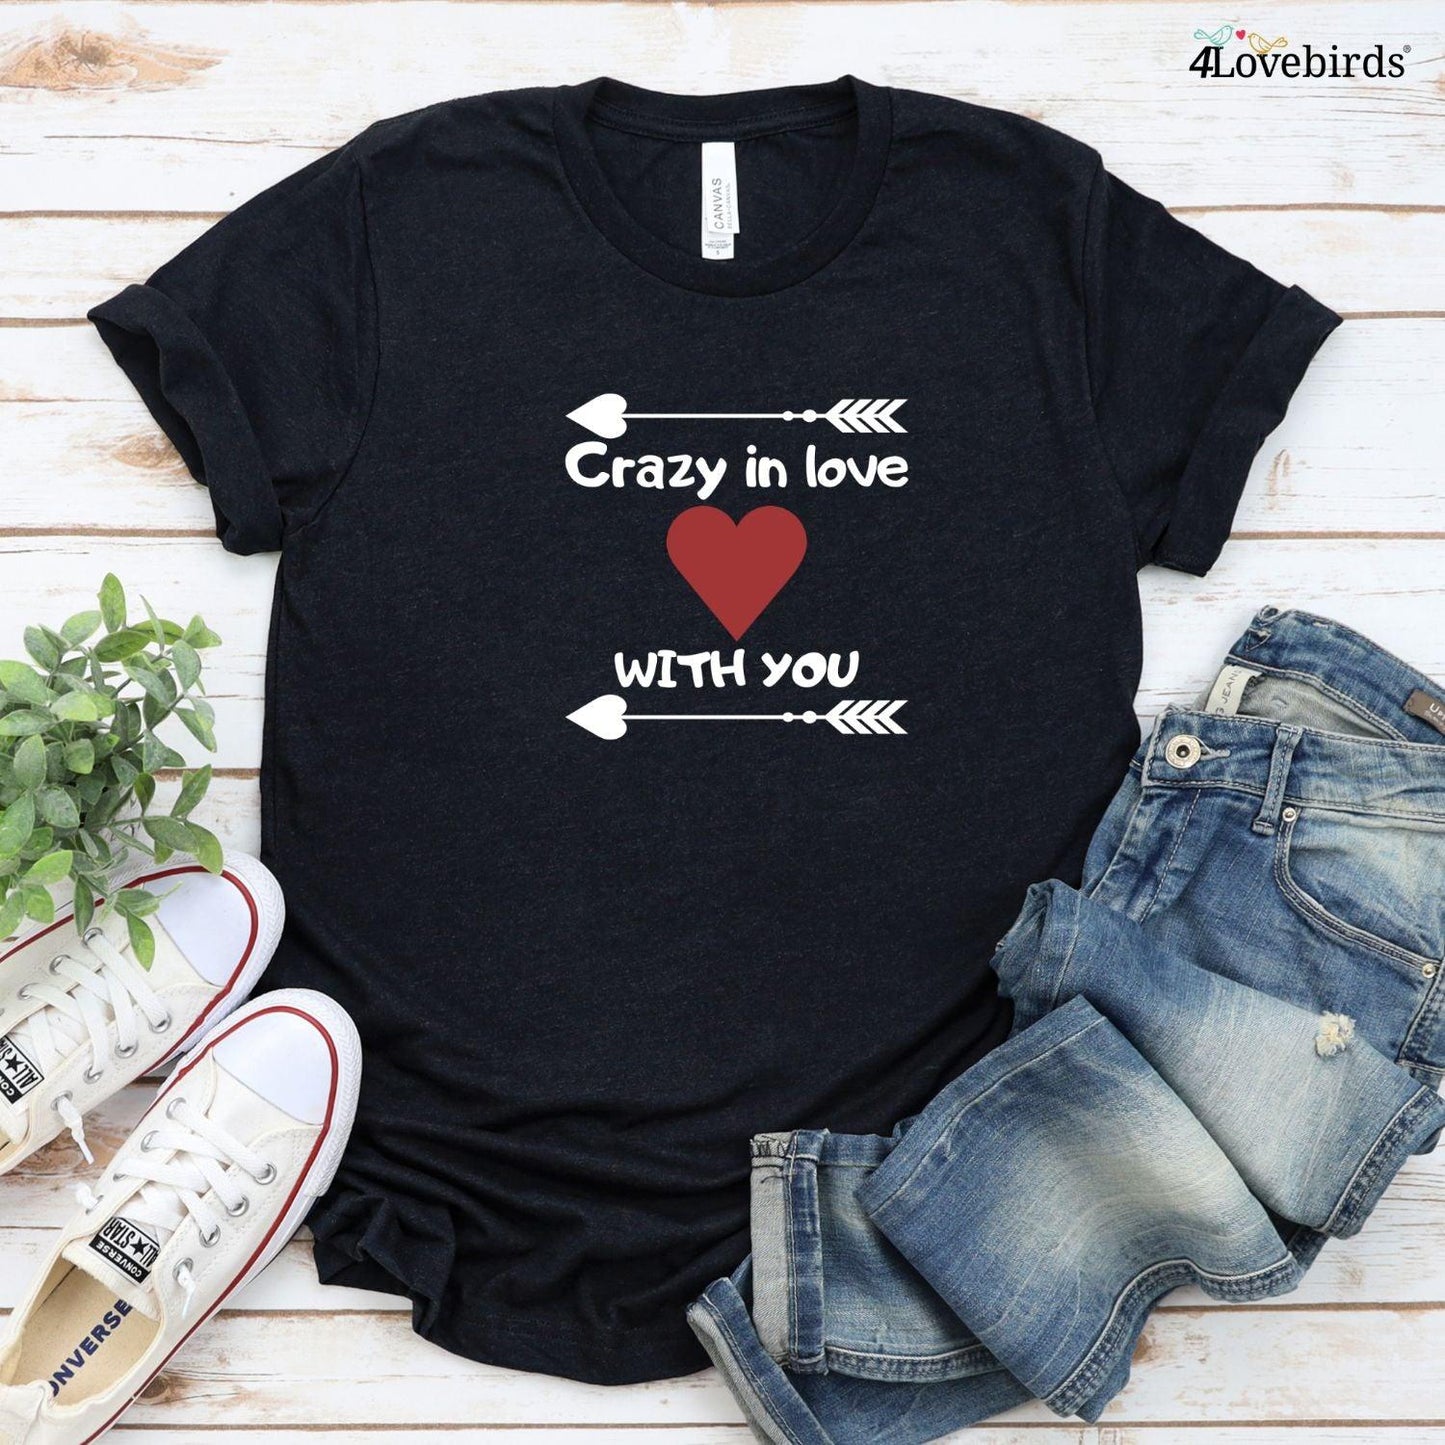 Crazy in Love With You Matching Outfits: Gifts for Couples, Valentine Ensemble, BF/GF - 4Lovebirds